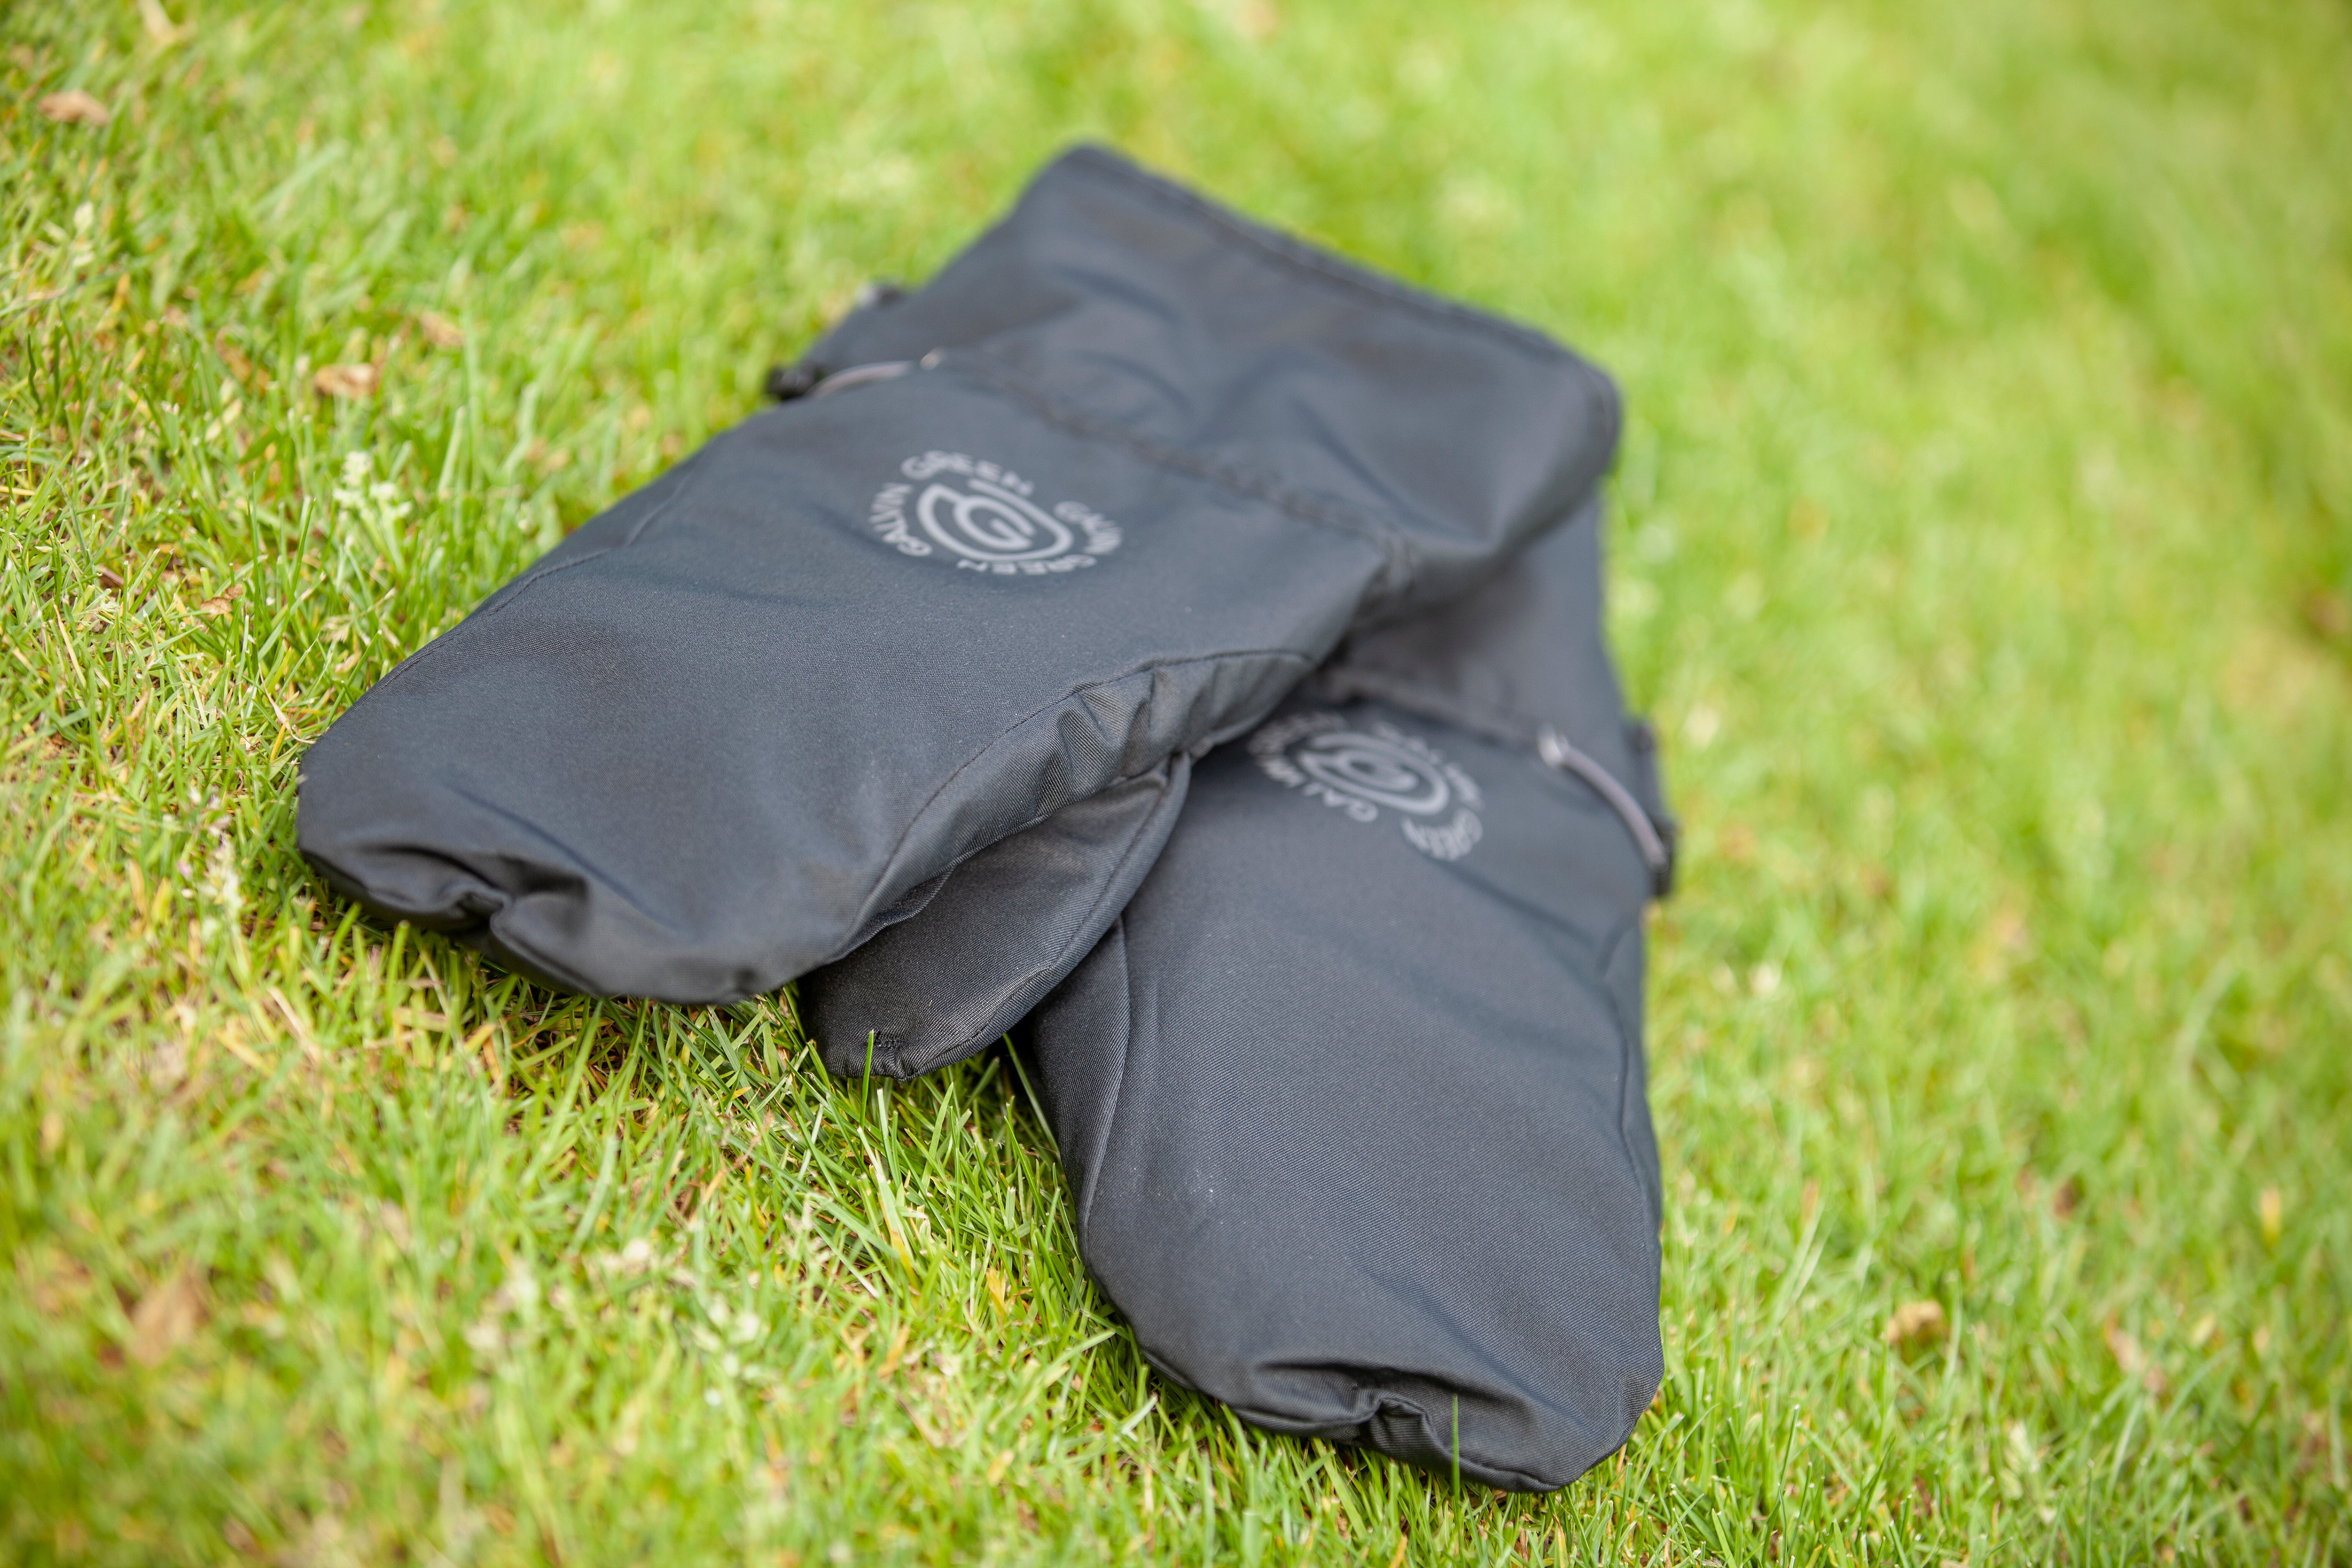 Black 'LANDON' Golf mitts in INTERFACE-1™ fabric with windproof lining.